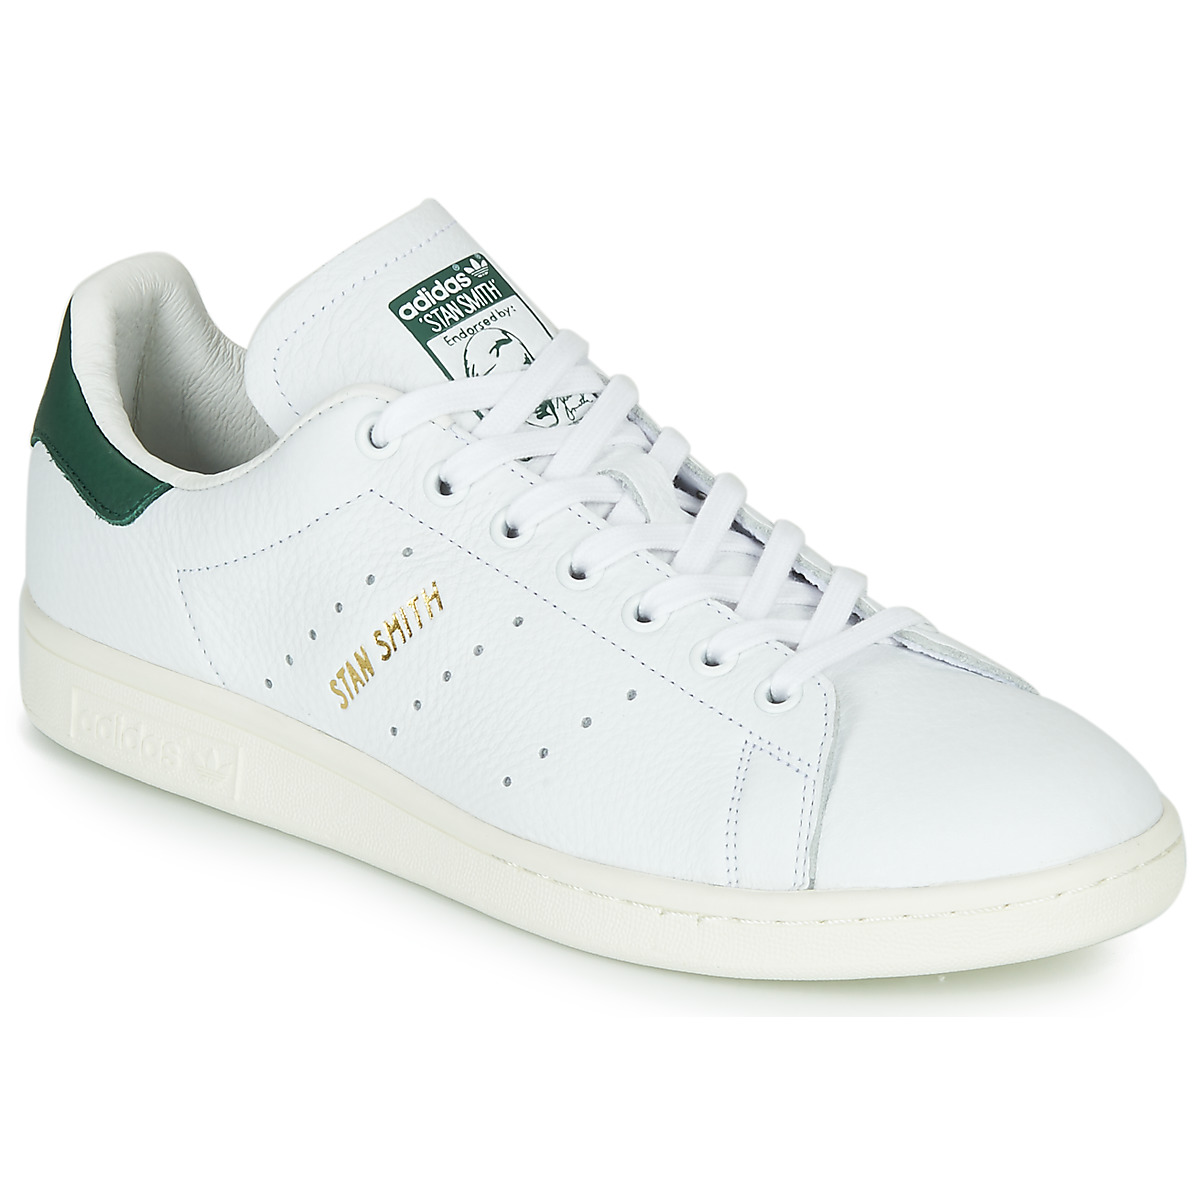 Xαμηλά Sneakers adidas STAN SMITH